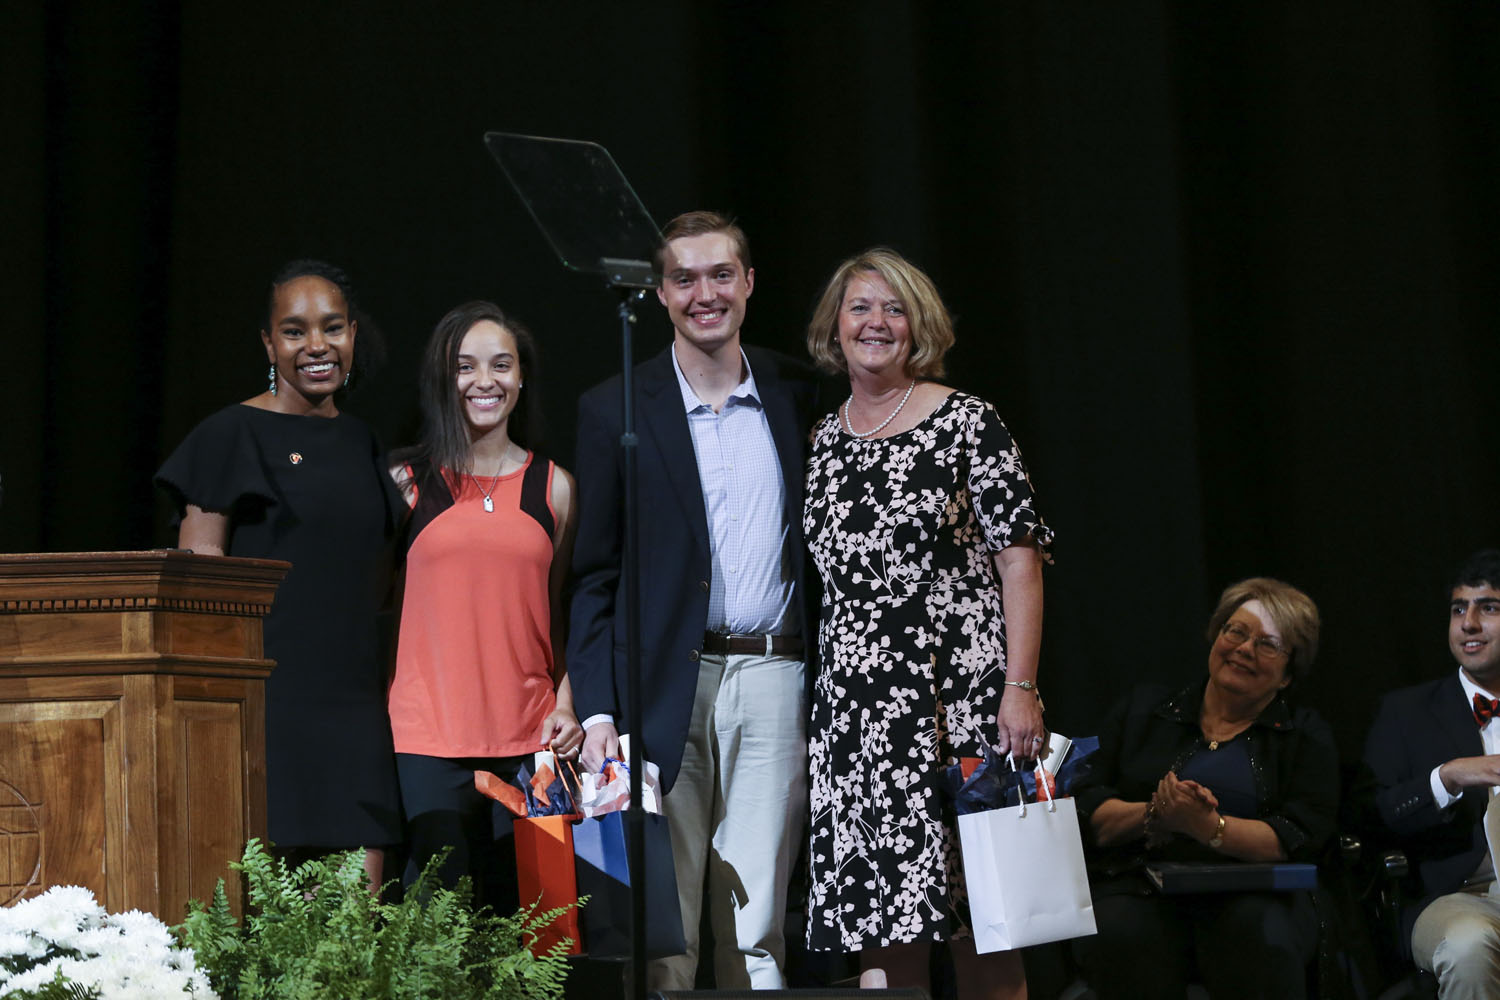 Standing for a group photo on stage.  Left to right: Bryanna F. Miller, left, Alysa M. Triplett, Jackson J.L. Nell, and Caroline “Carrie” Rudder.